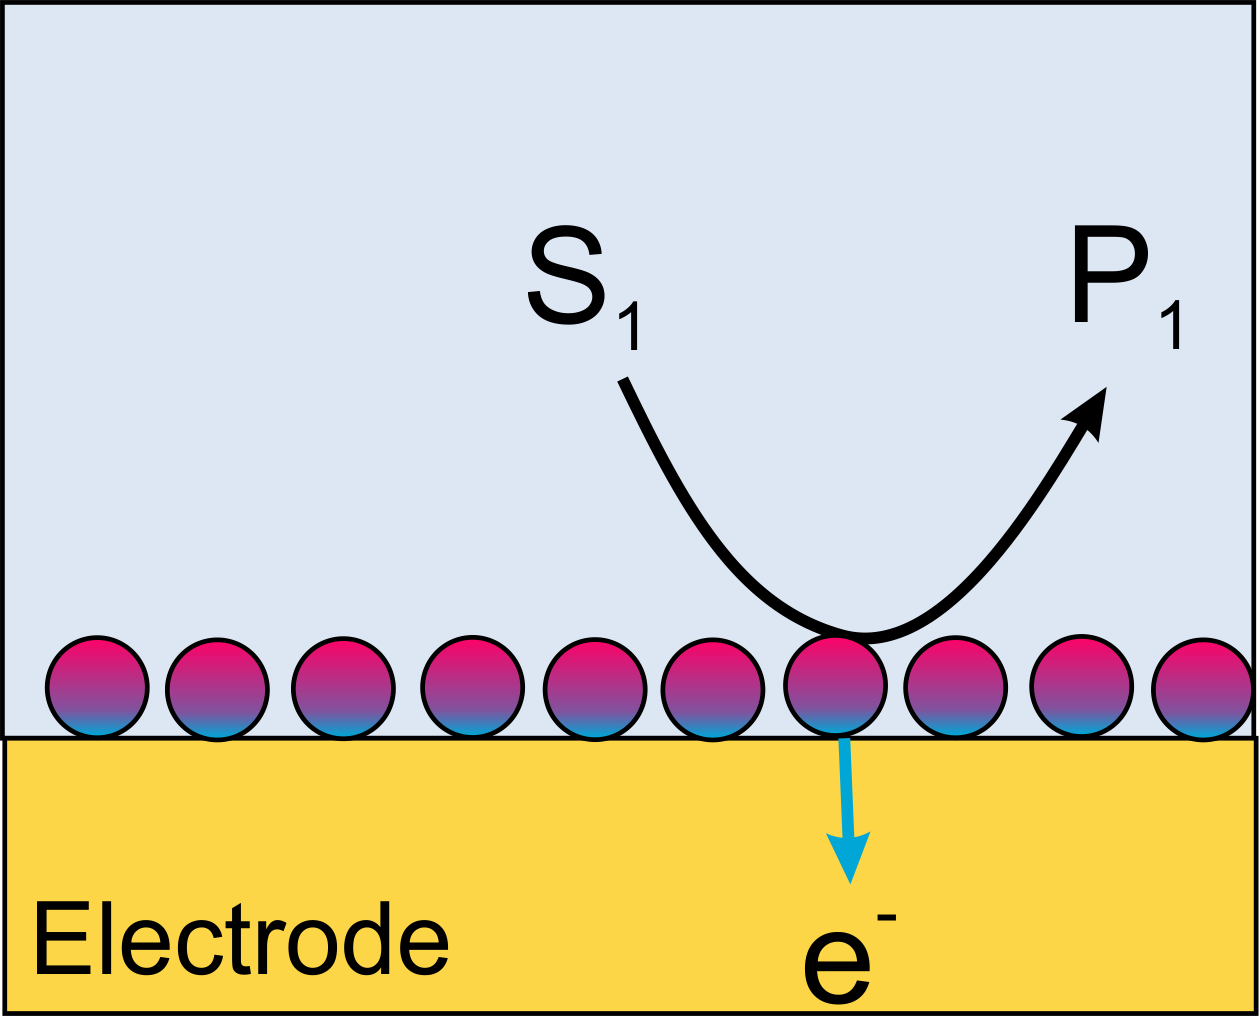 Scheme cross section of electrode with direkt electron transfer